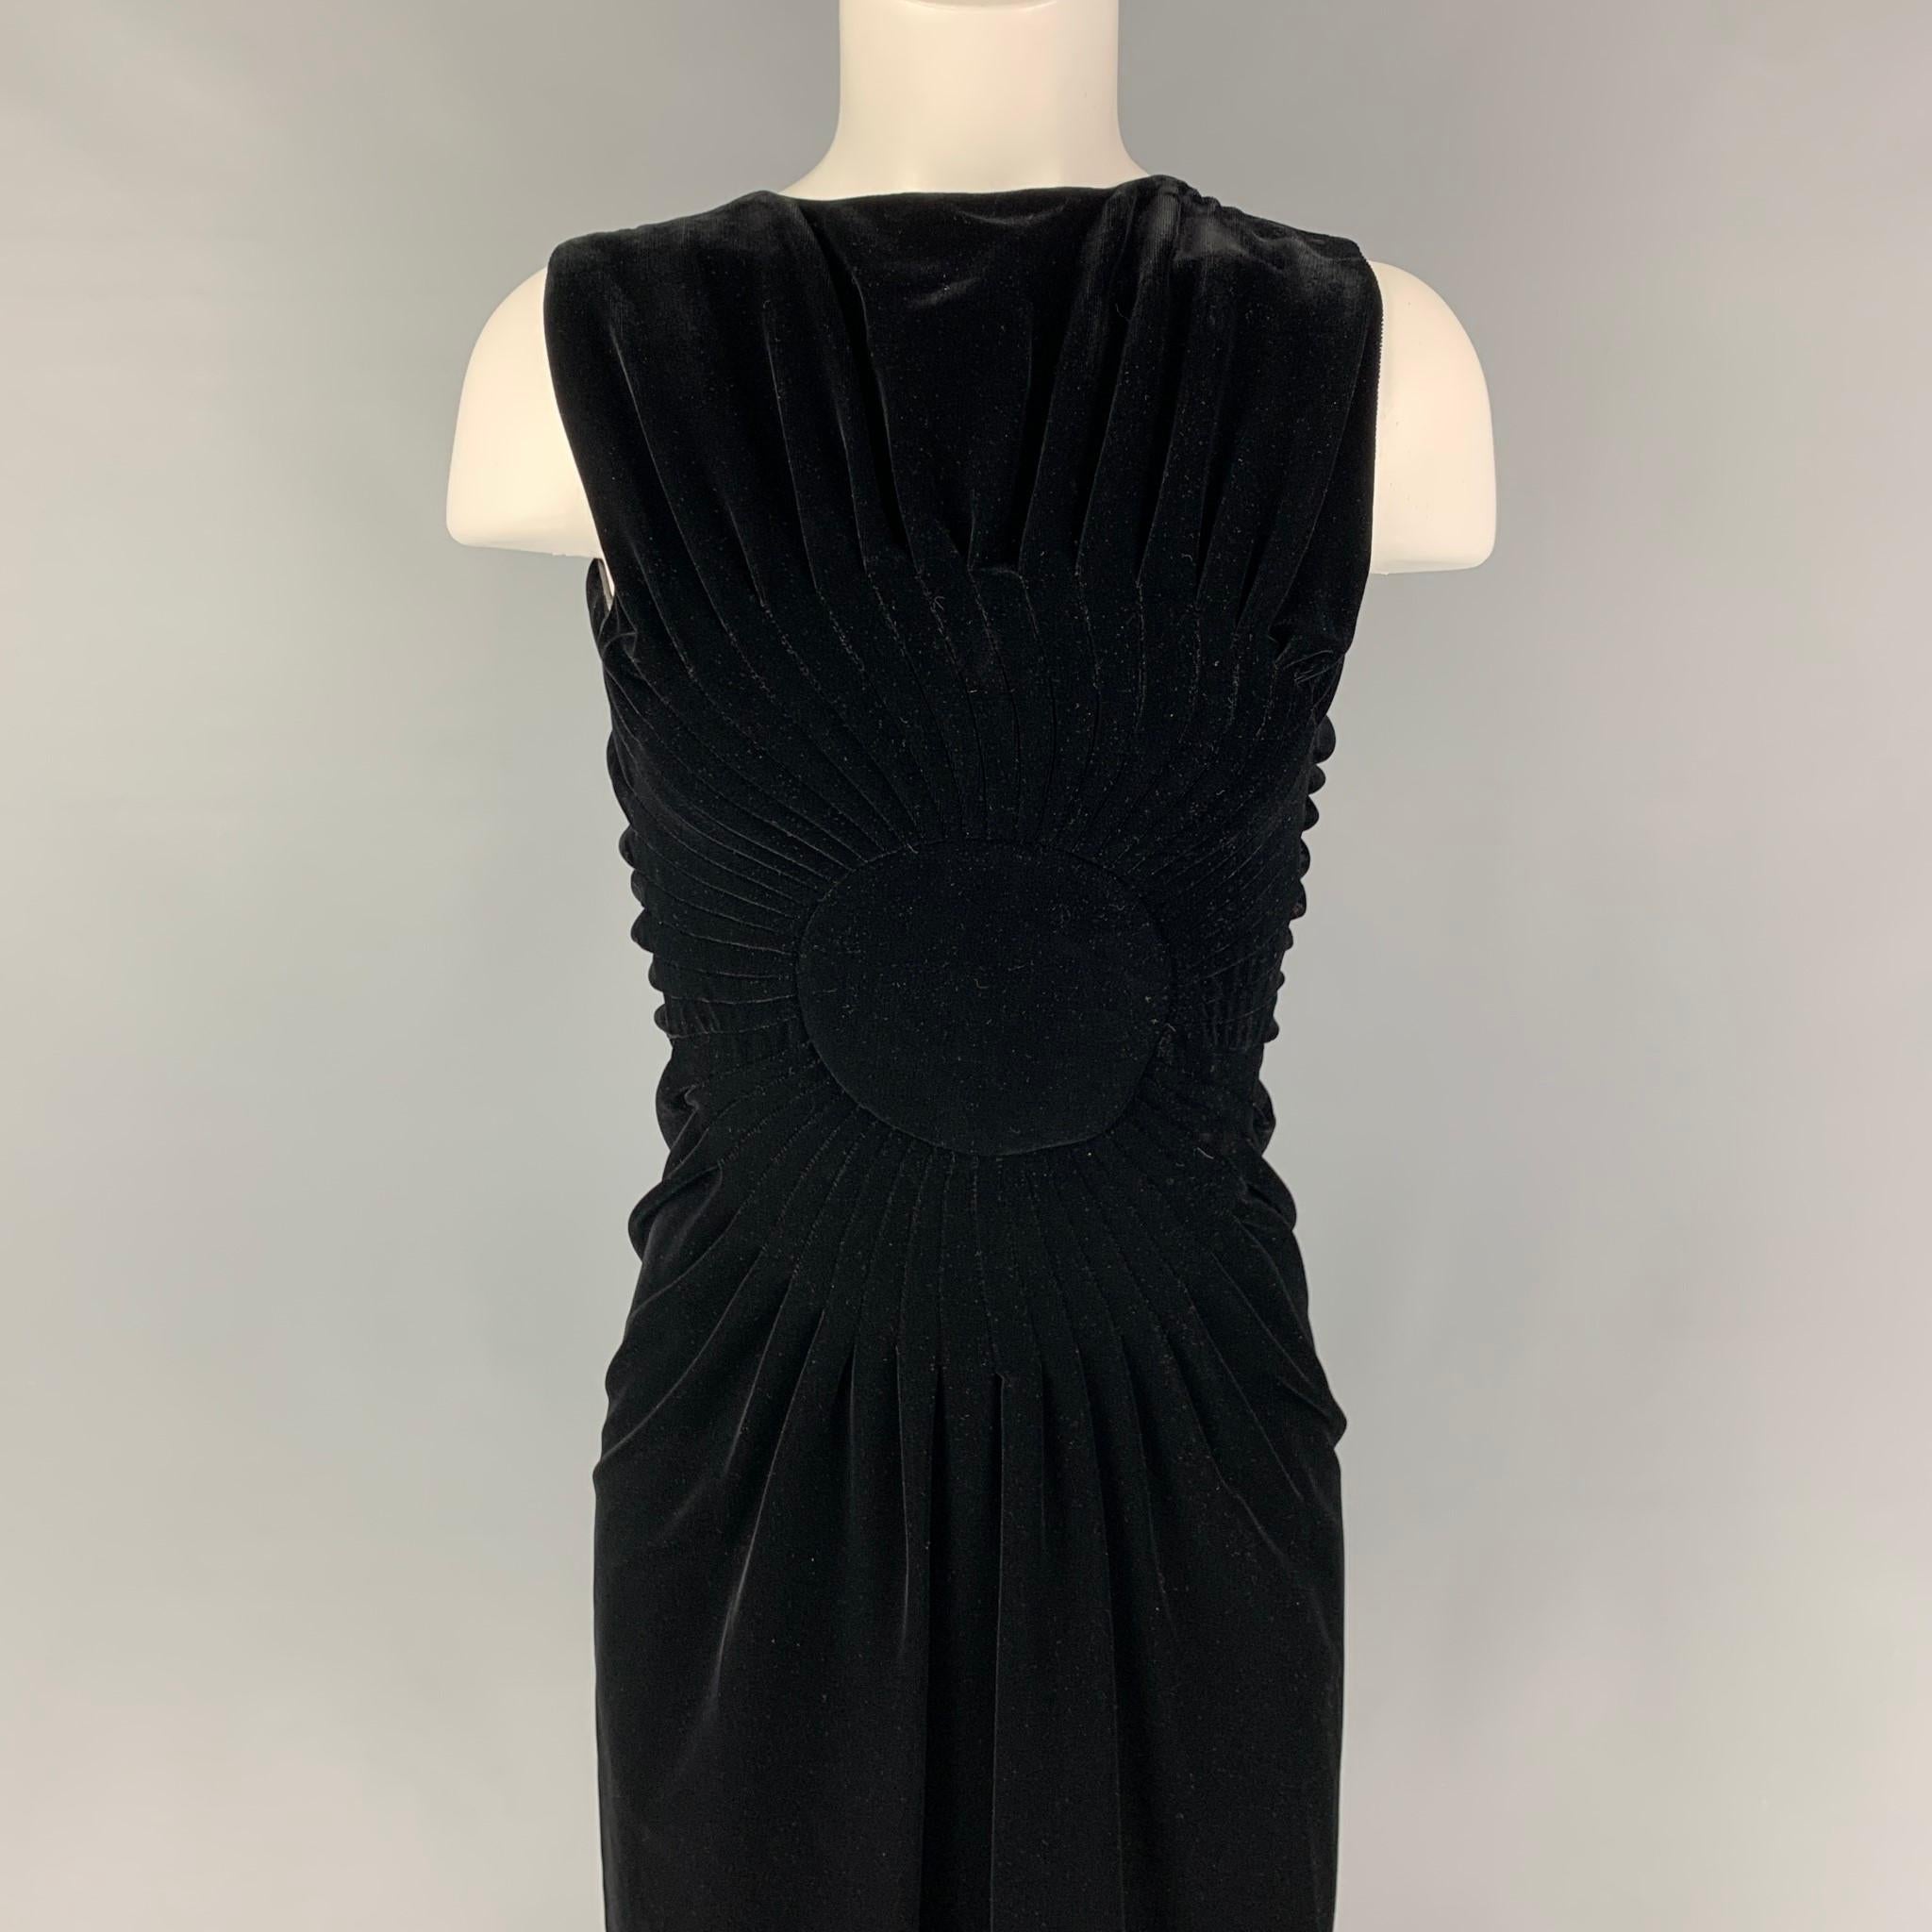 JIL SANDER dress comes in a black velvet viscose blend featuring a ruffled design, sleeveless, and a back zip up closure. Made in Italy. 

Very Good Pre-Owned Condition.
Marked: 34
Original Retail Price: $1,280.00

Measurements:

Shoulder: 13